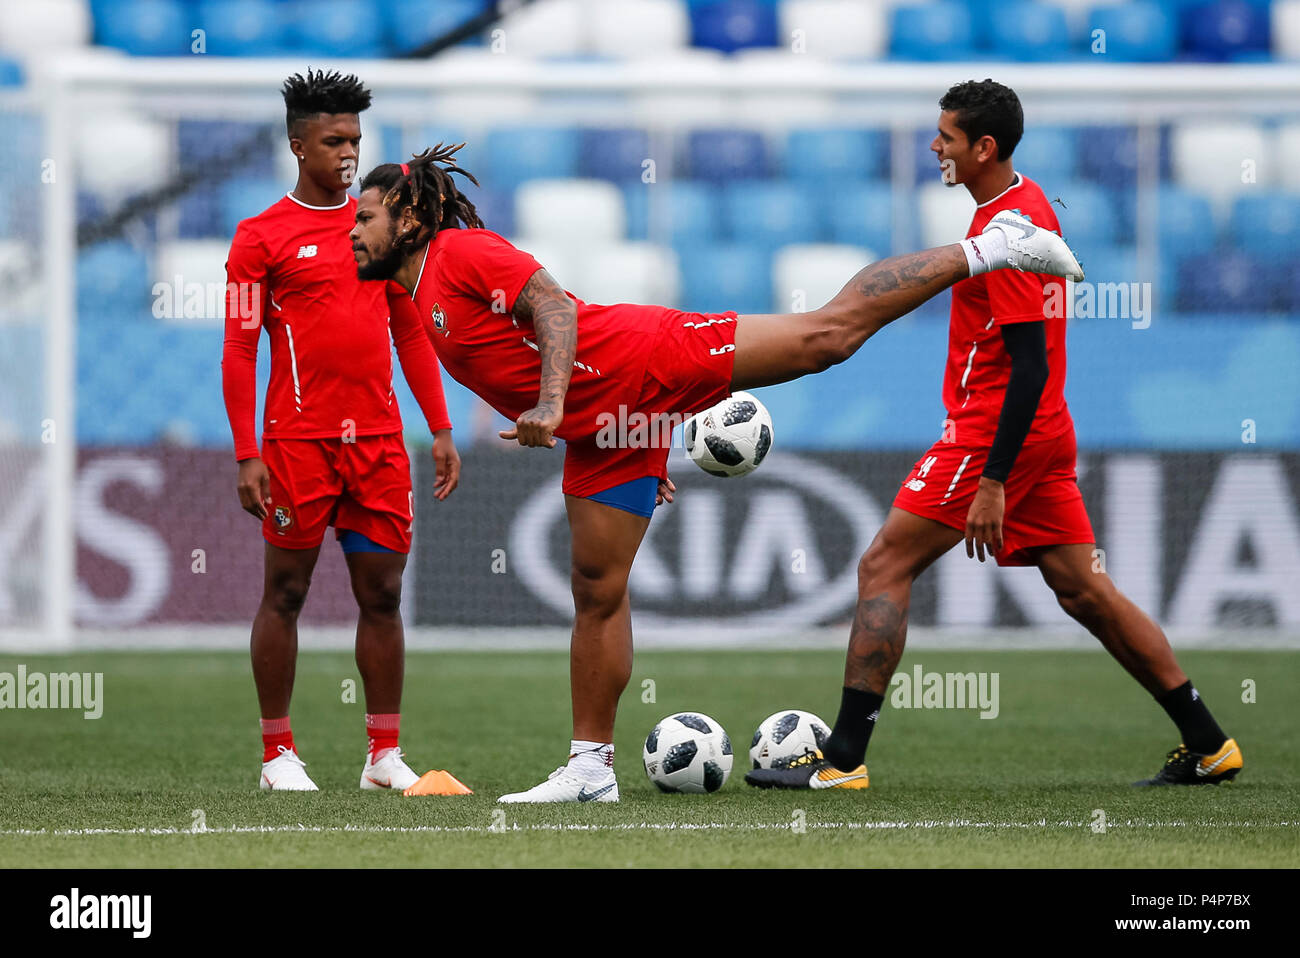 Nizhny Novgorod, Russia. 23rd June 2018. Roman Torres of Panama during a Panama training session, prior to their 2018 FIFA World Cup Group G match against England, at Nizhny Novgorod Stadium on June 23rd 2018 in Nizhny Novgorod, Russia. (Photo by Daniel Chesterton/phcimages.com) Credit: PHC Images/Alamy Live News Stock Photo